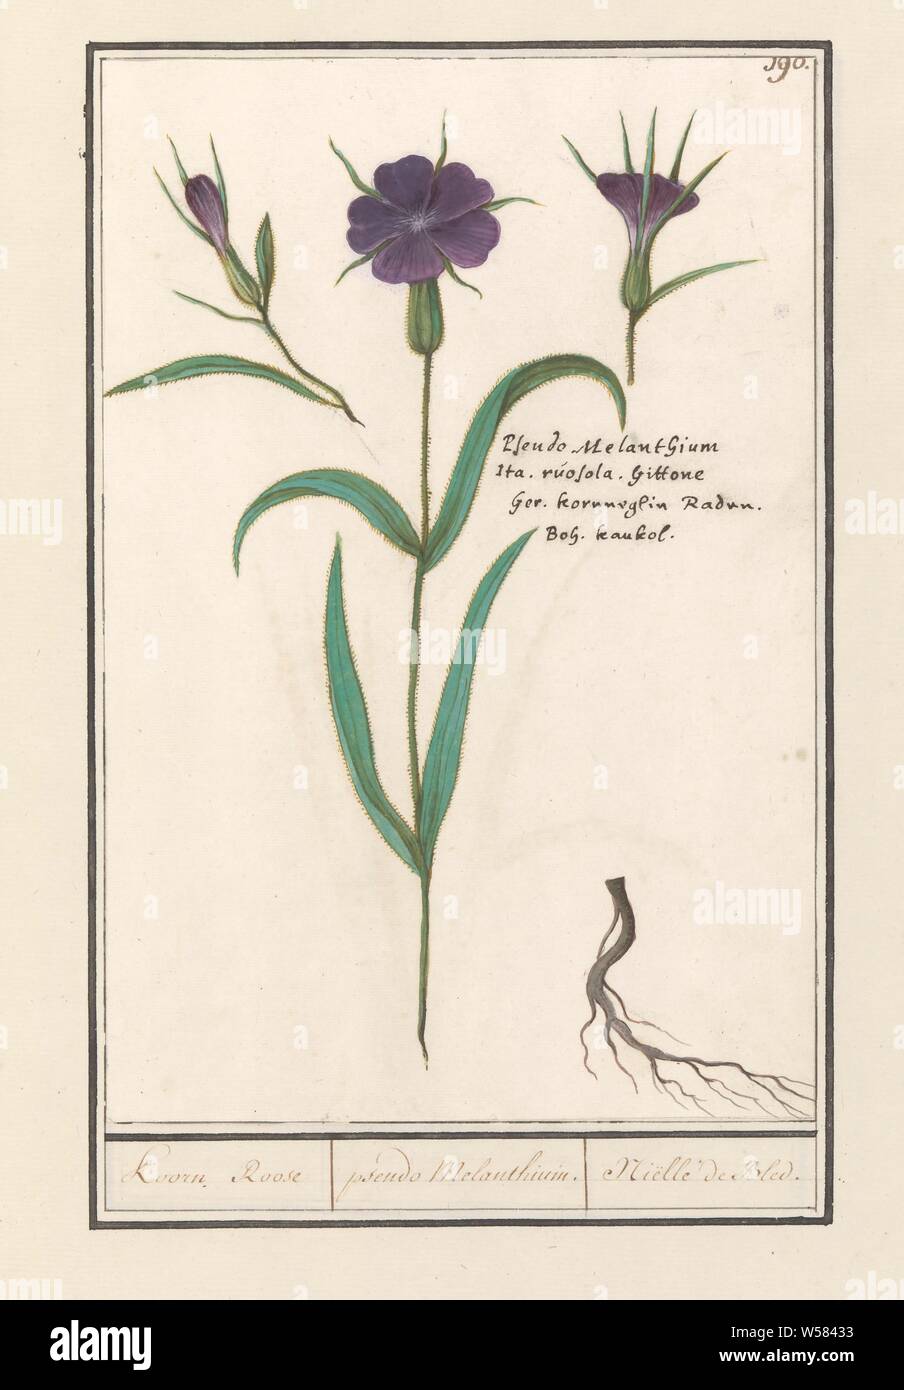 Bolderik (Agrostemma githago) Koorn Roose / pseudo Melanthium. / Nielle de Bled (title on object), Bolderik or corn rose. Numbered top right: 190. Right the name in four languages. Part of the second album with drawings of flowers and plants. Ninth of twelve albums with drawings of animals, birds and plants known around 1600, commissioned by Emperor Rudolf II. With explanations in Dutch, Latin and French, Anselmus Boetius de Boodt, 1596 - 1610, paper, watercolor (paint), deck paint, chalk, ink, pen, h 258 mm × w 172 mm Stock Photo